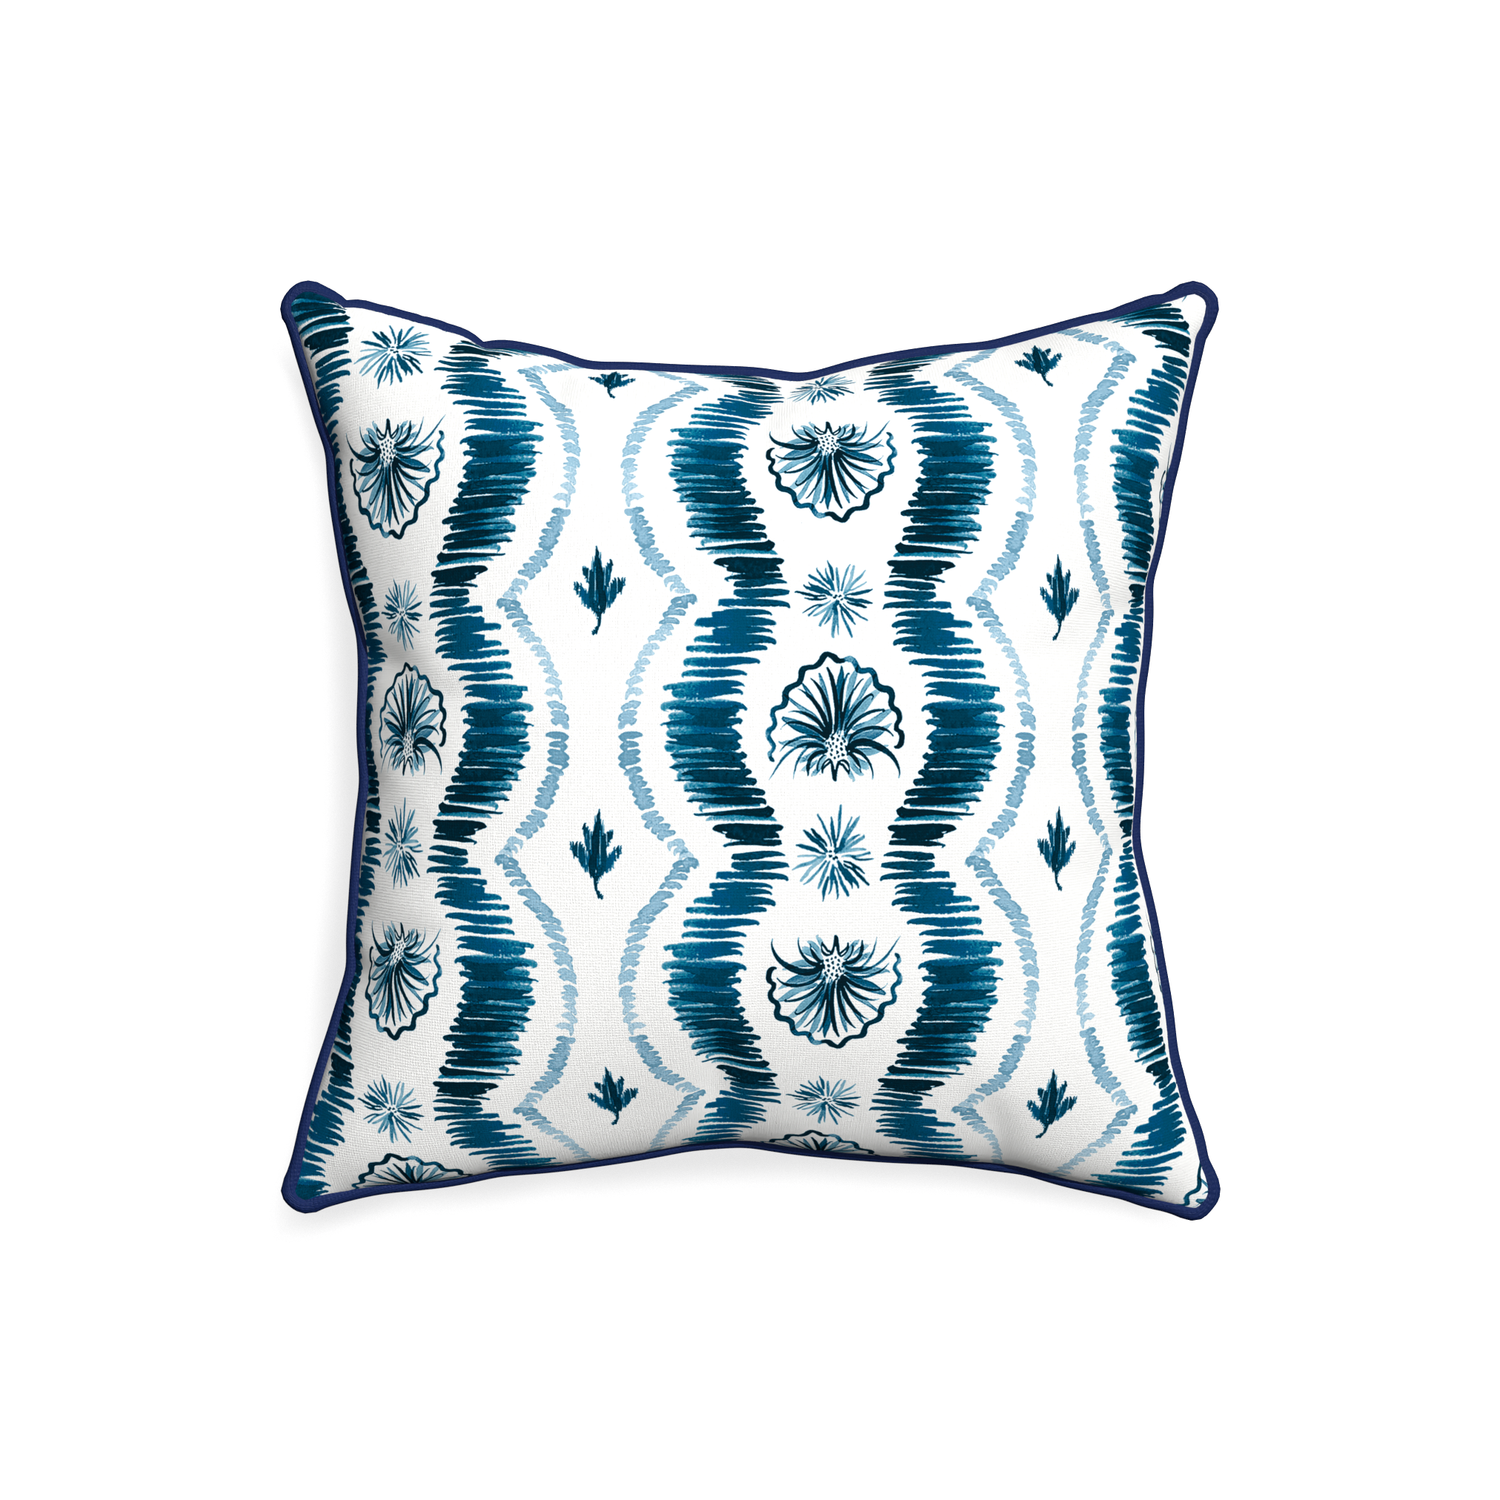 20-square alice custom blue ikatpillow with midnight piping on white background